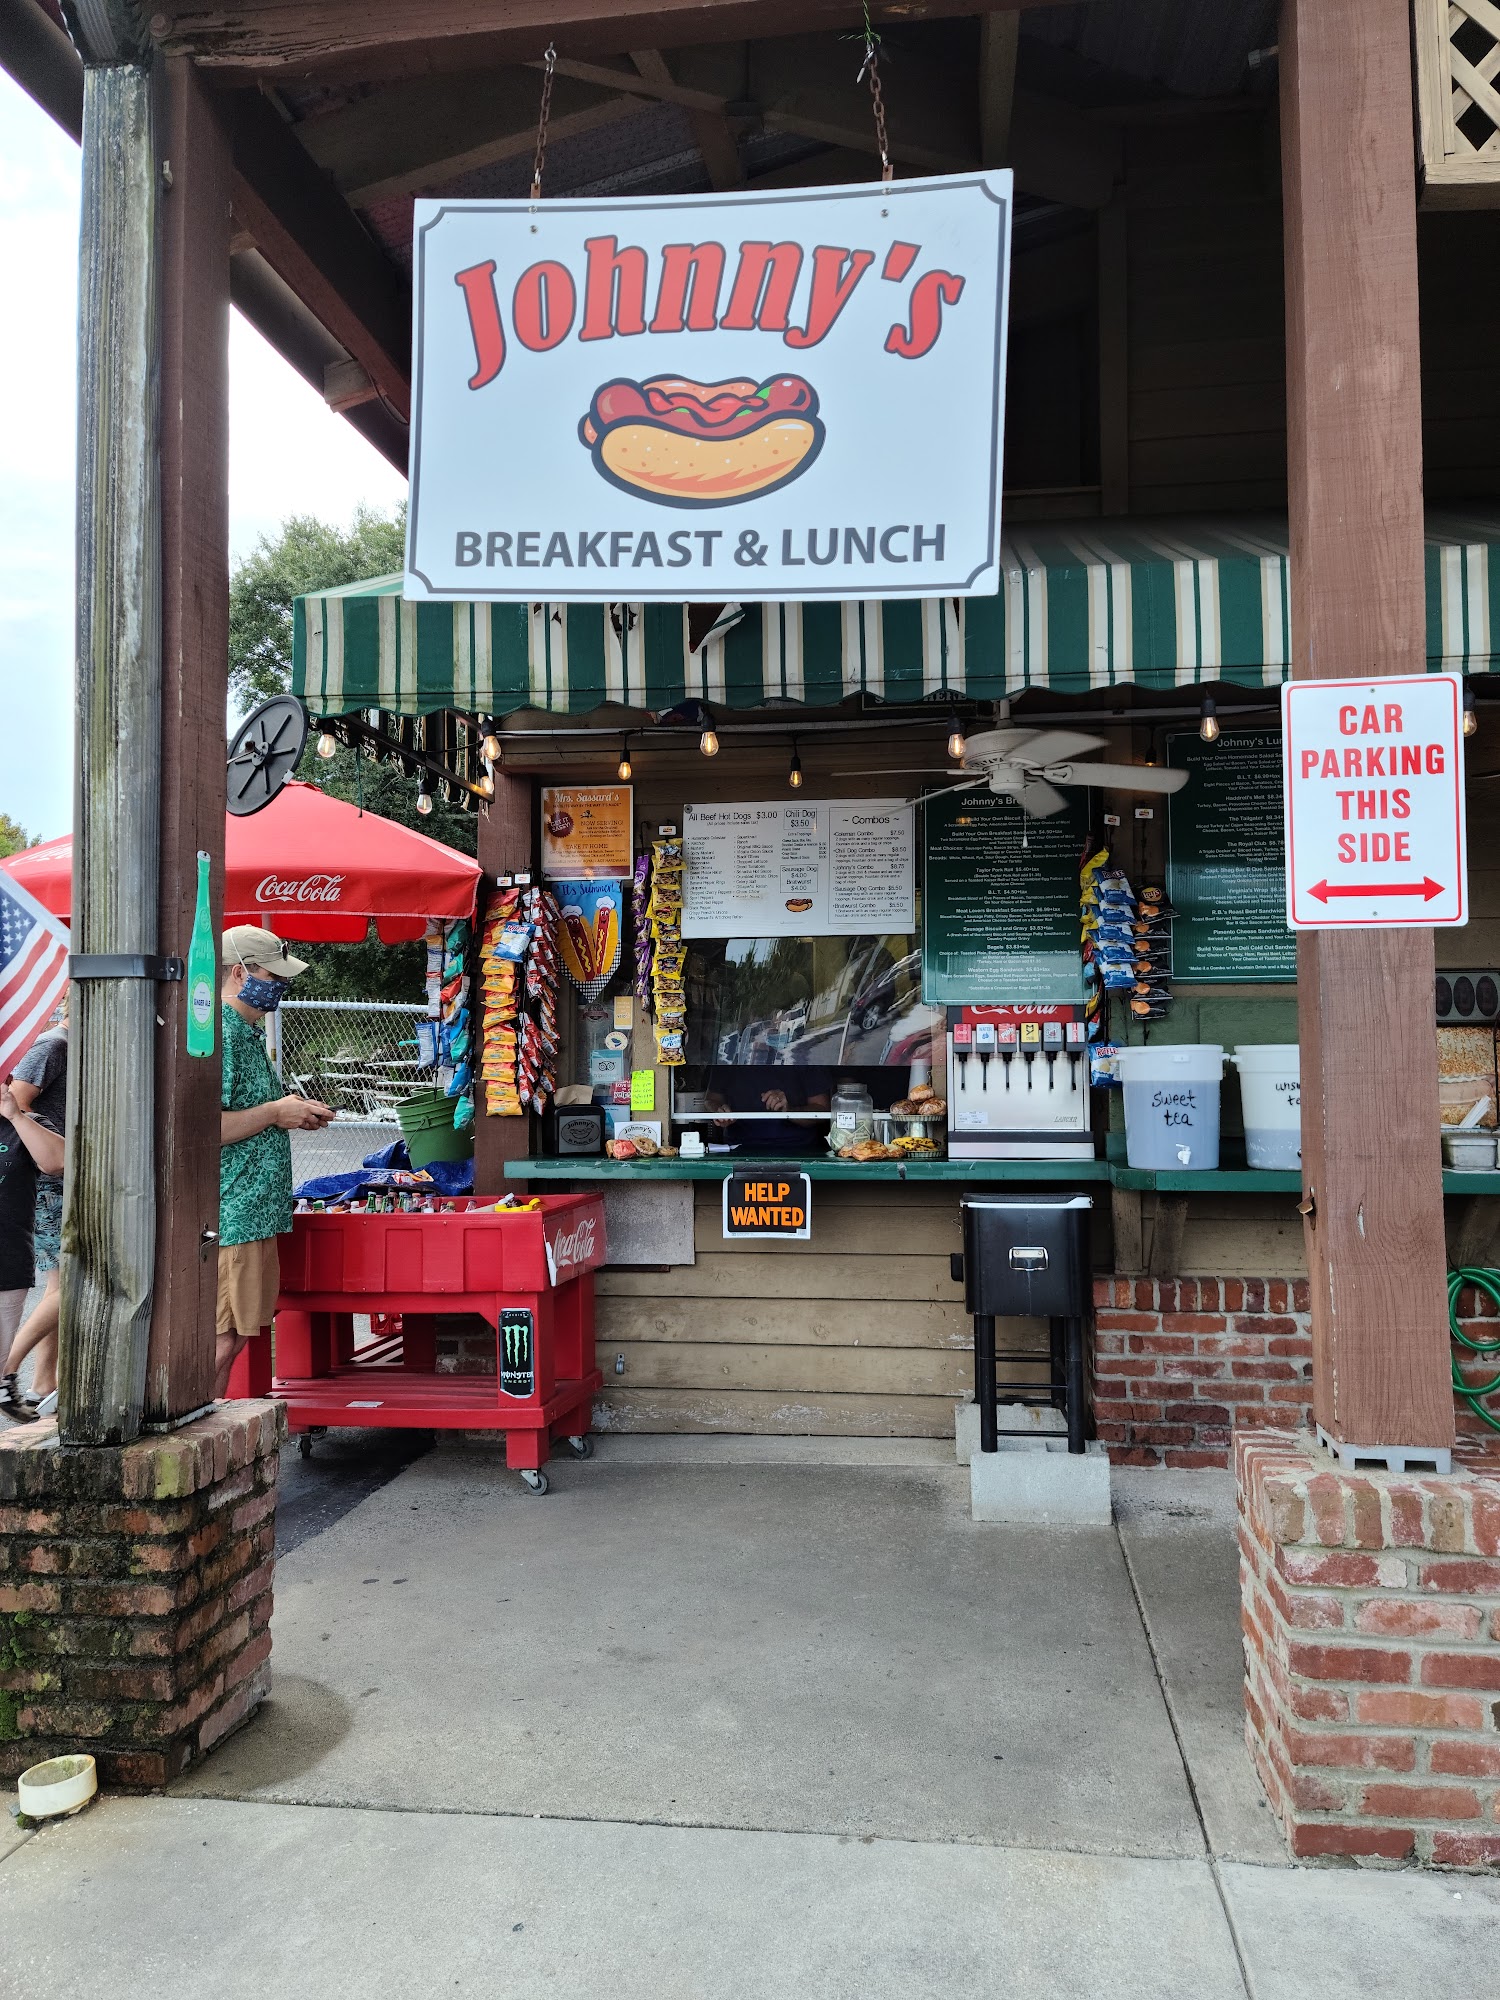 Johnny's Hot Dogs